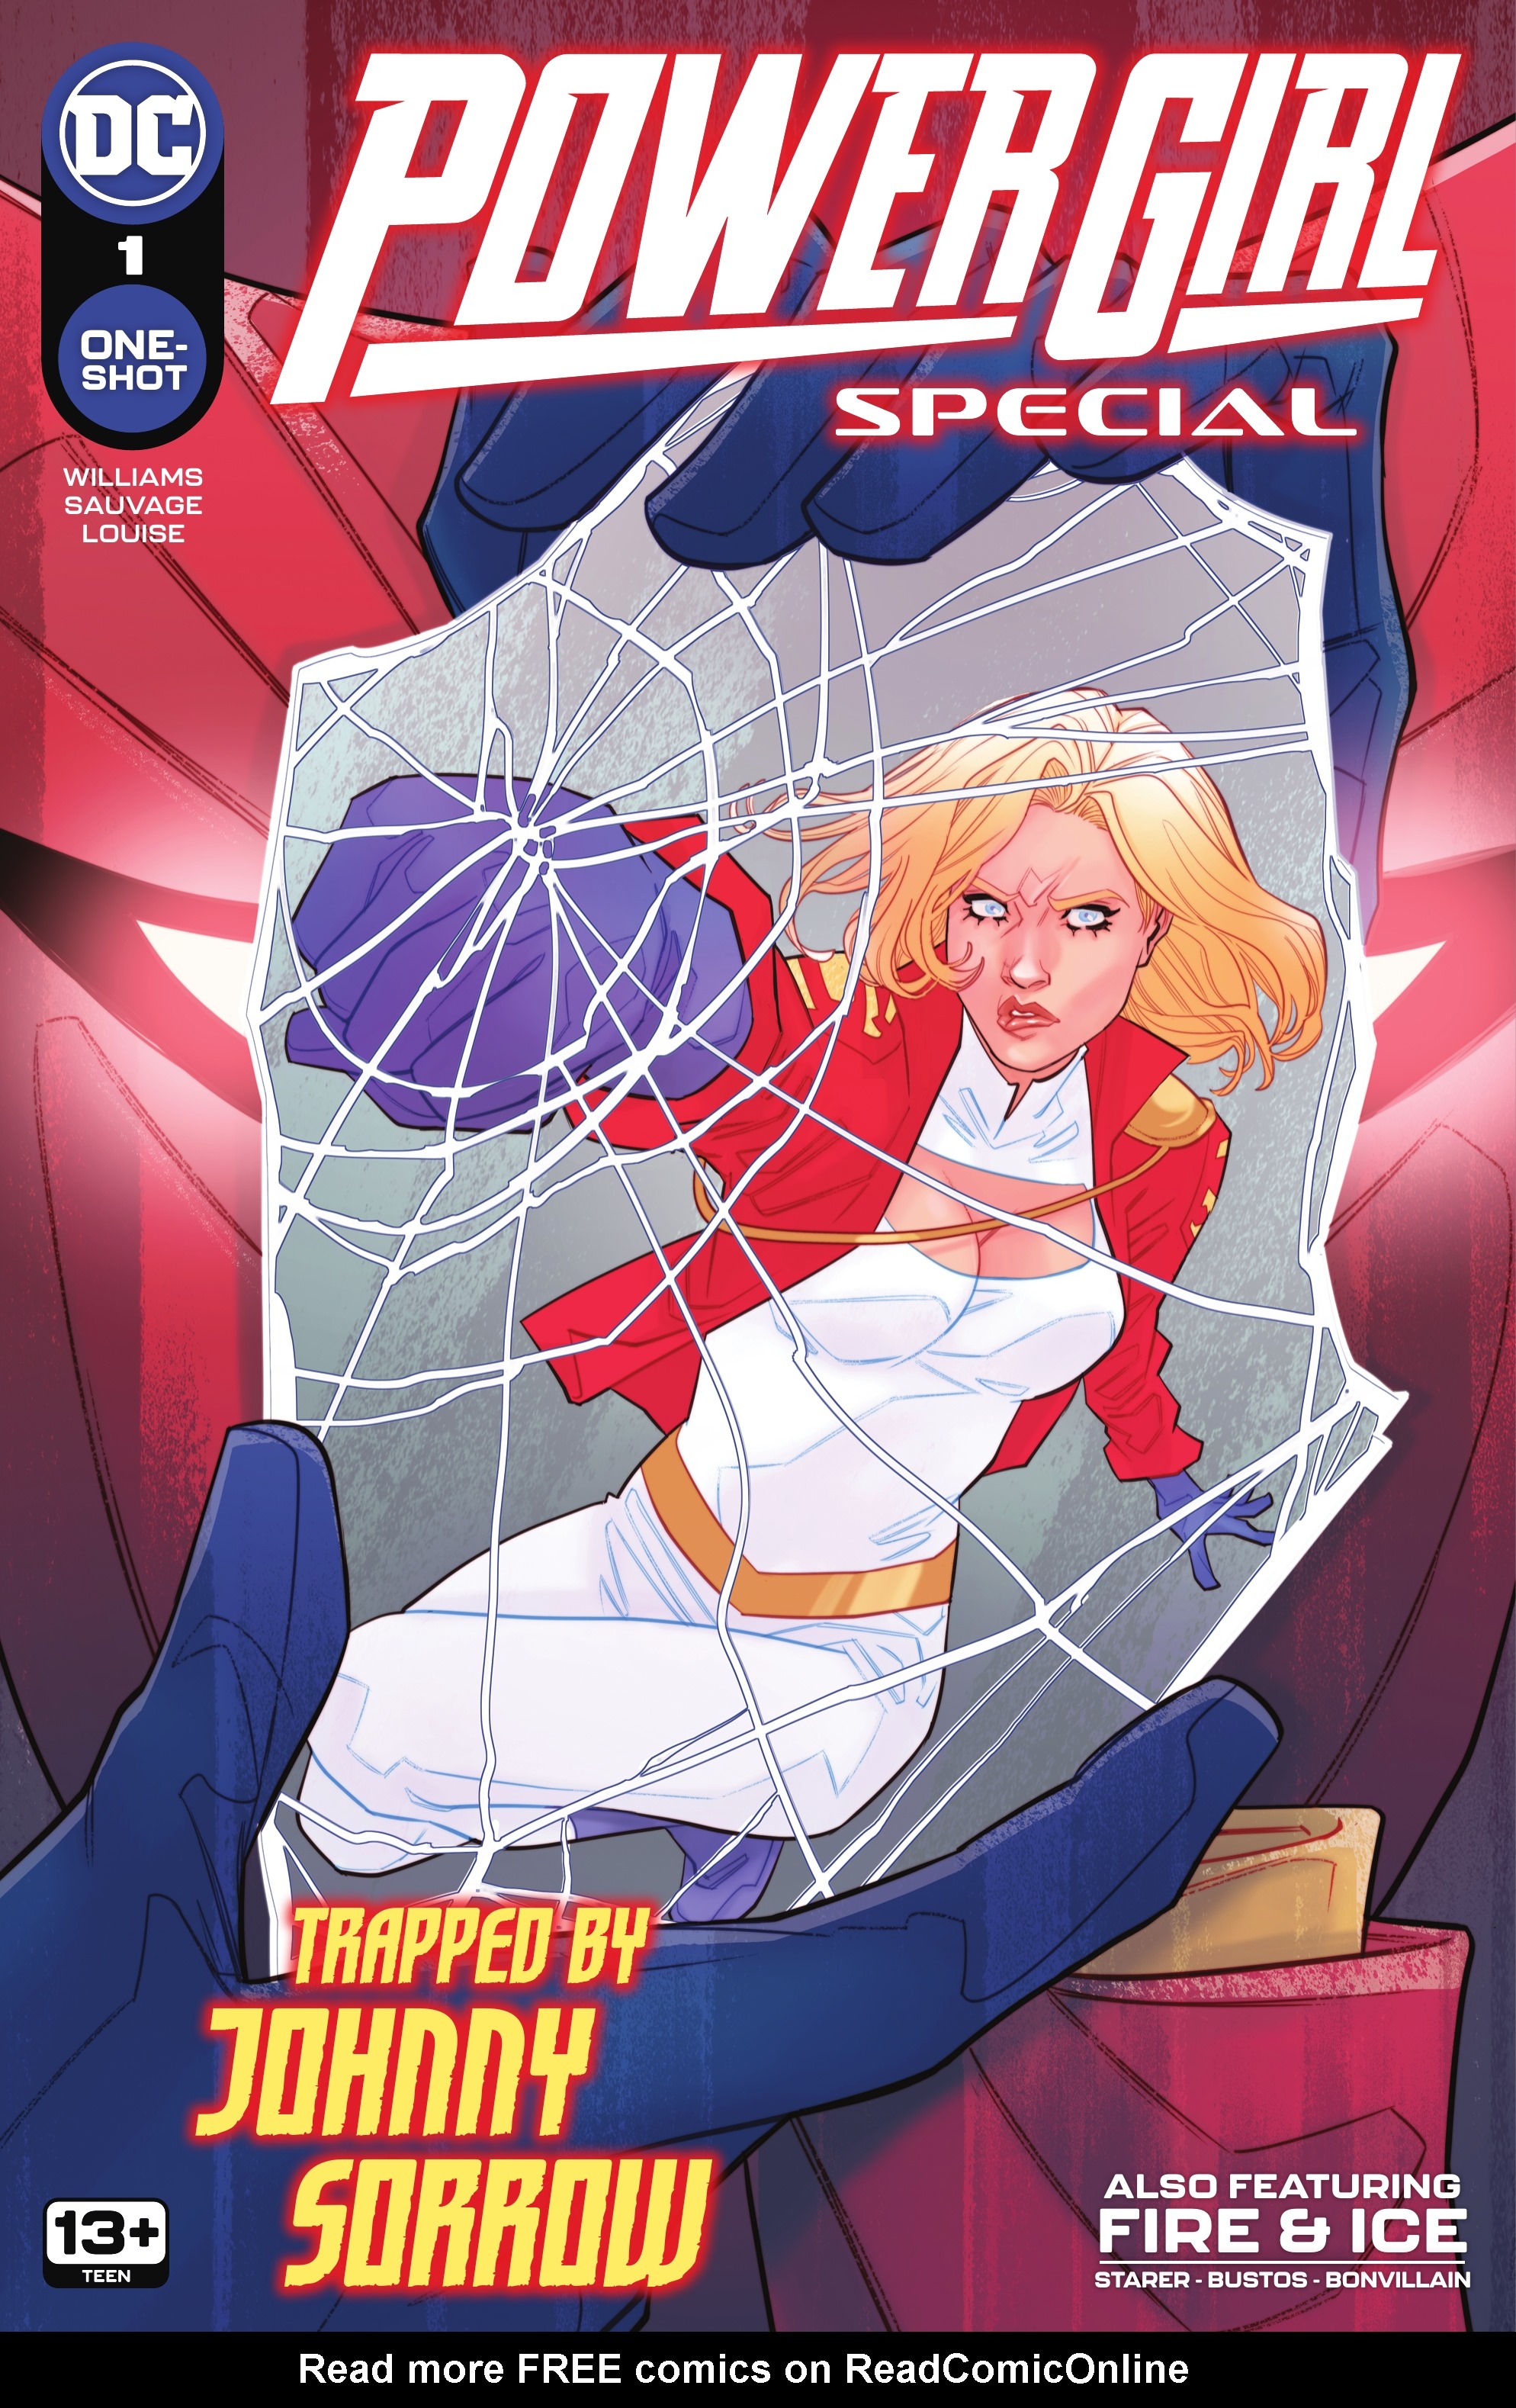 Read online Power Girl Special comic -  Issue # Full - 1